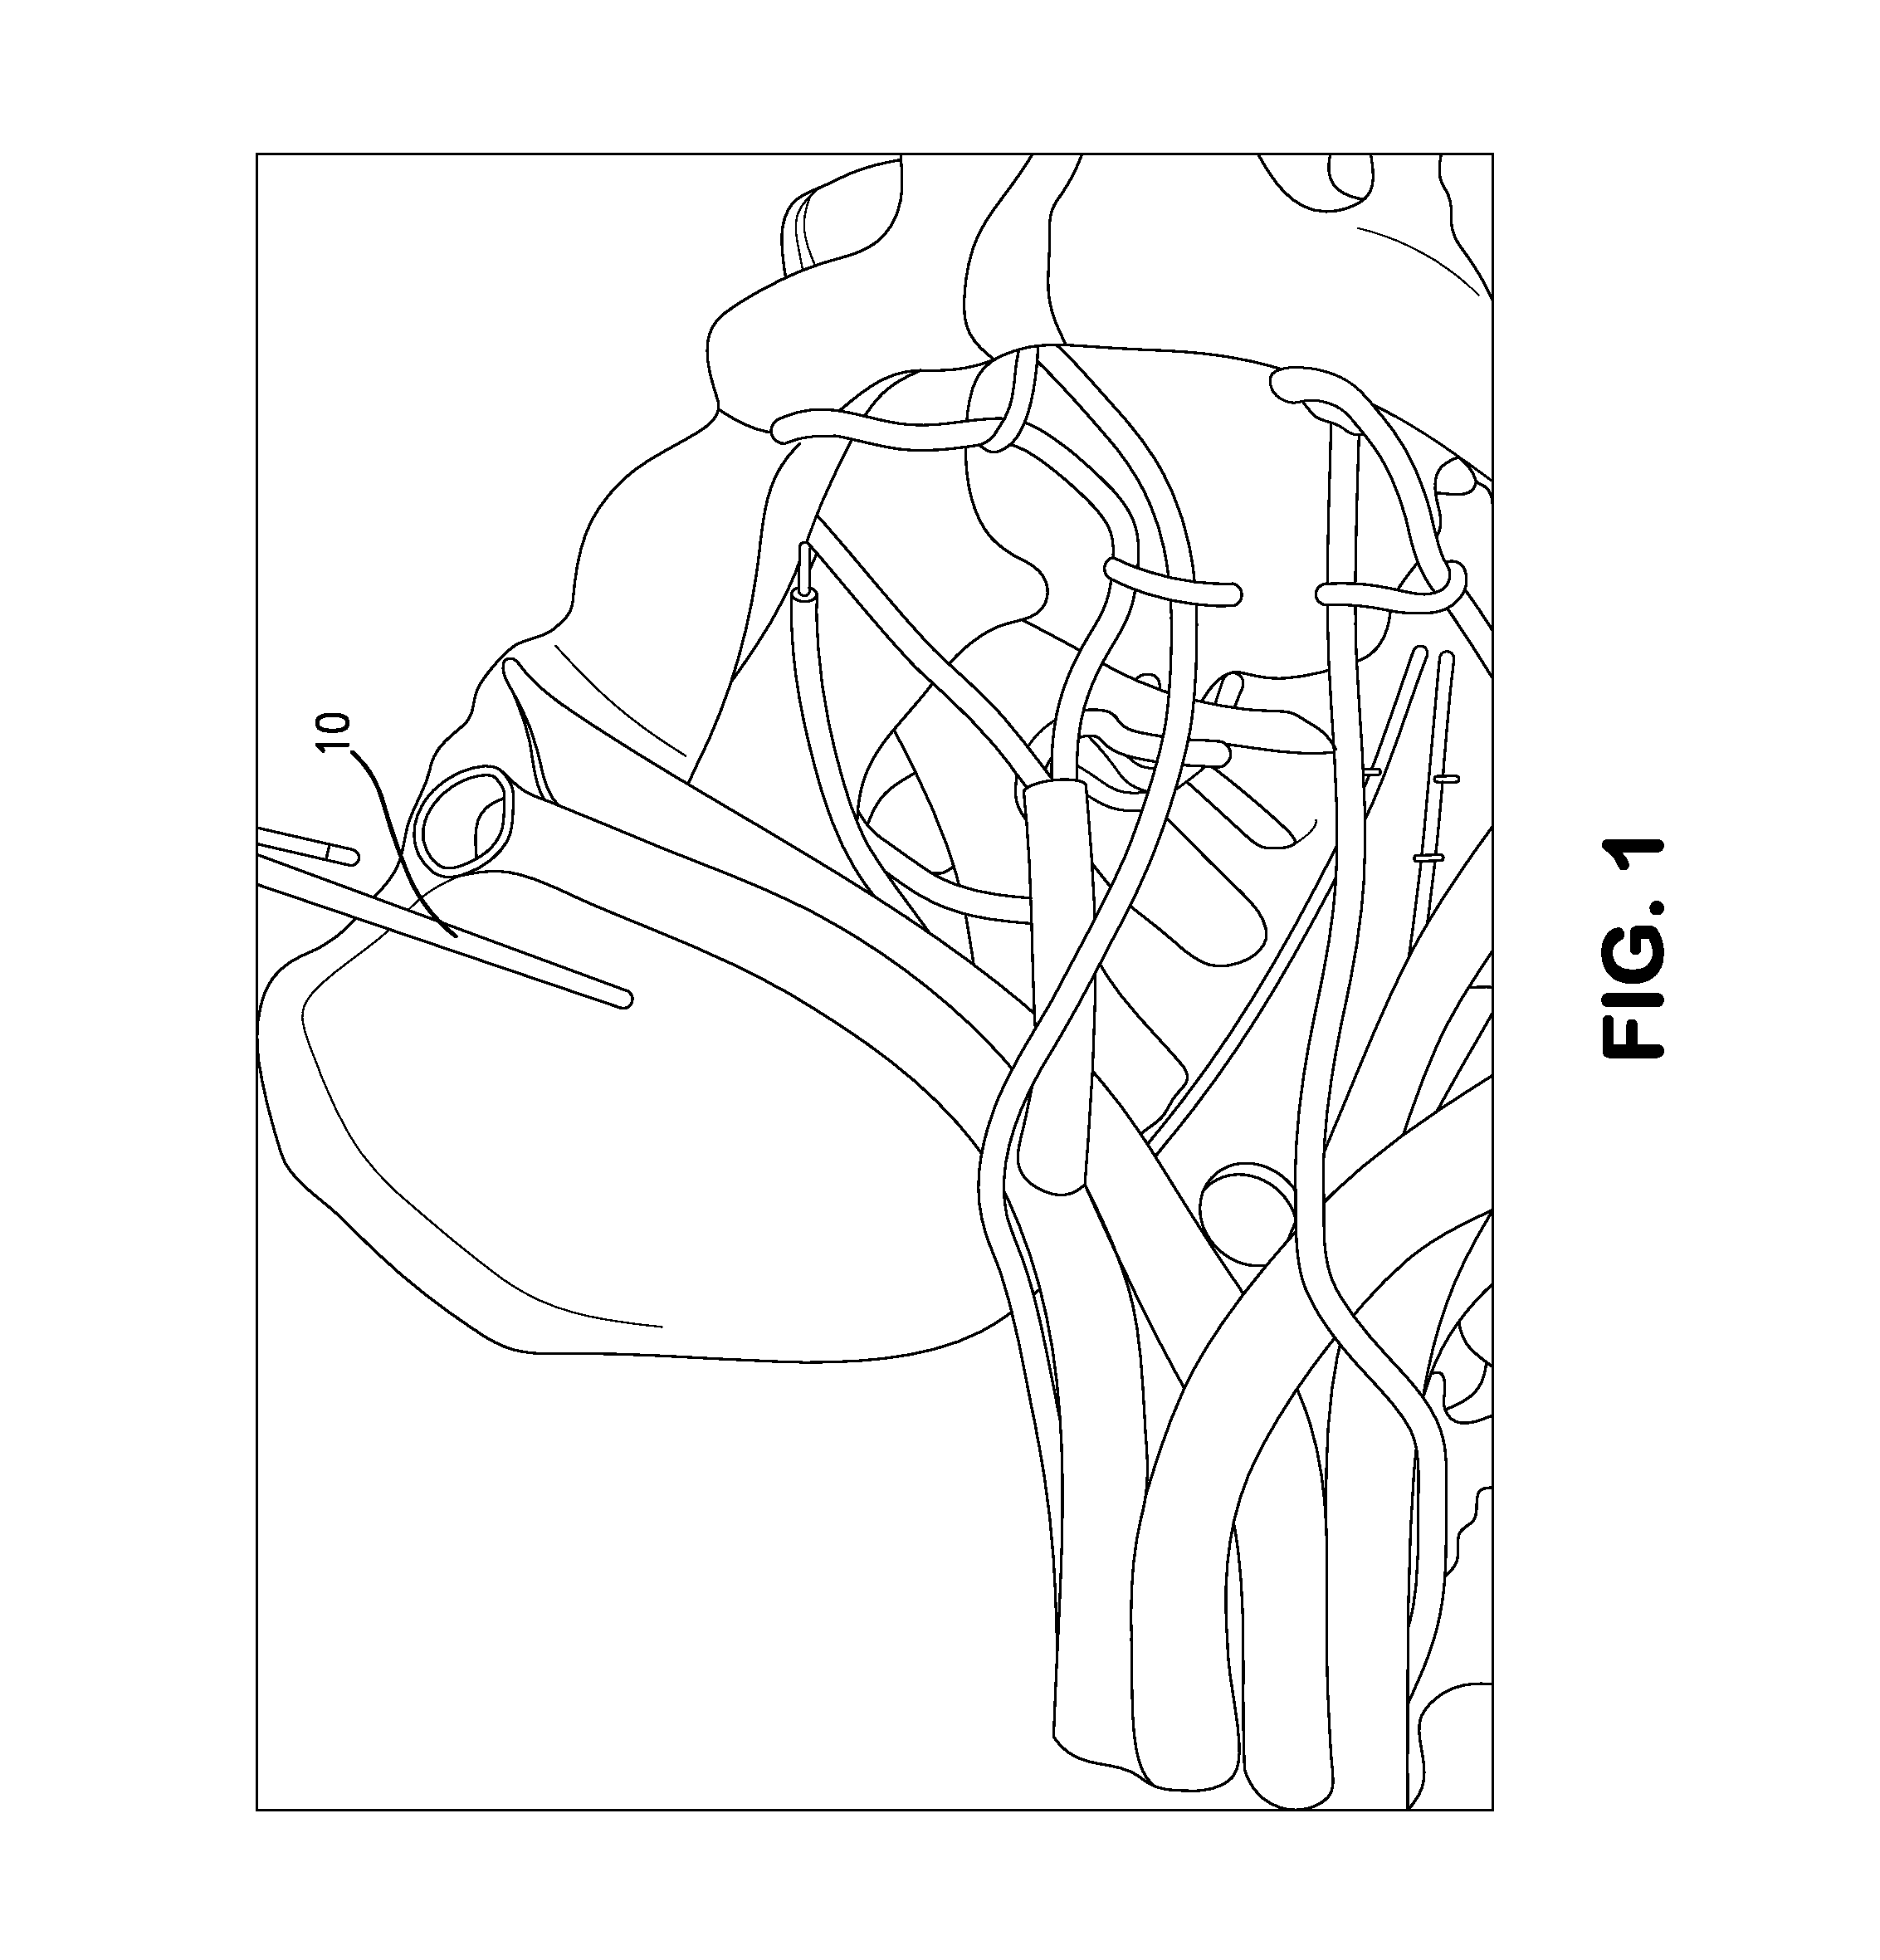 System and method for implantation of lead and electrodes to the endopelvic portion of the pelvic nerves to treat pelvic floor/organ dysfunctions and pelvic neuropathic pain